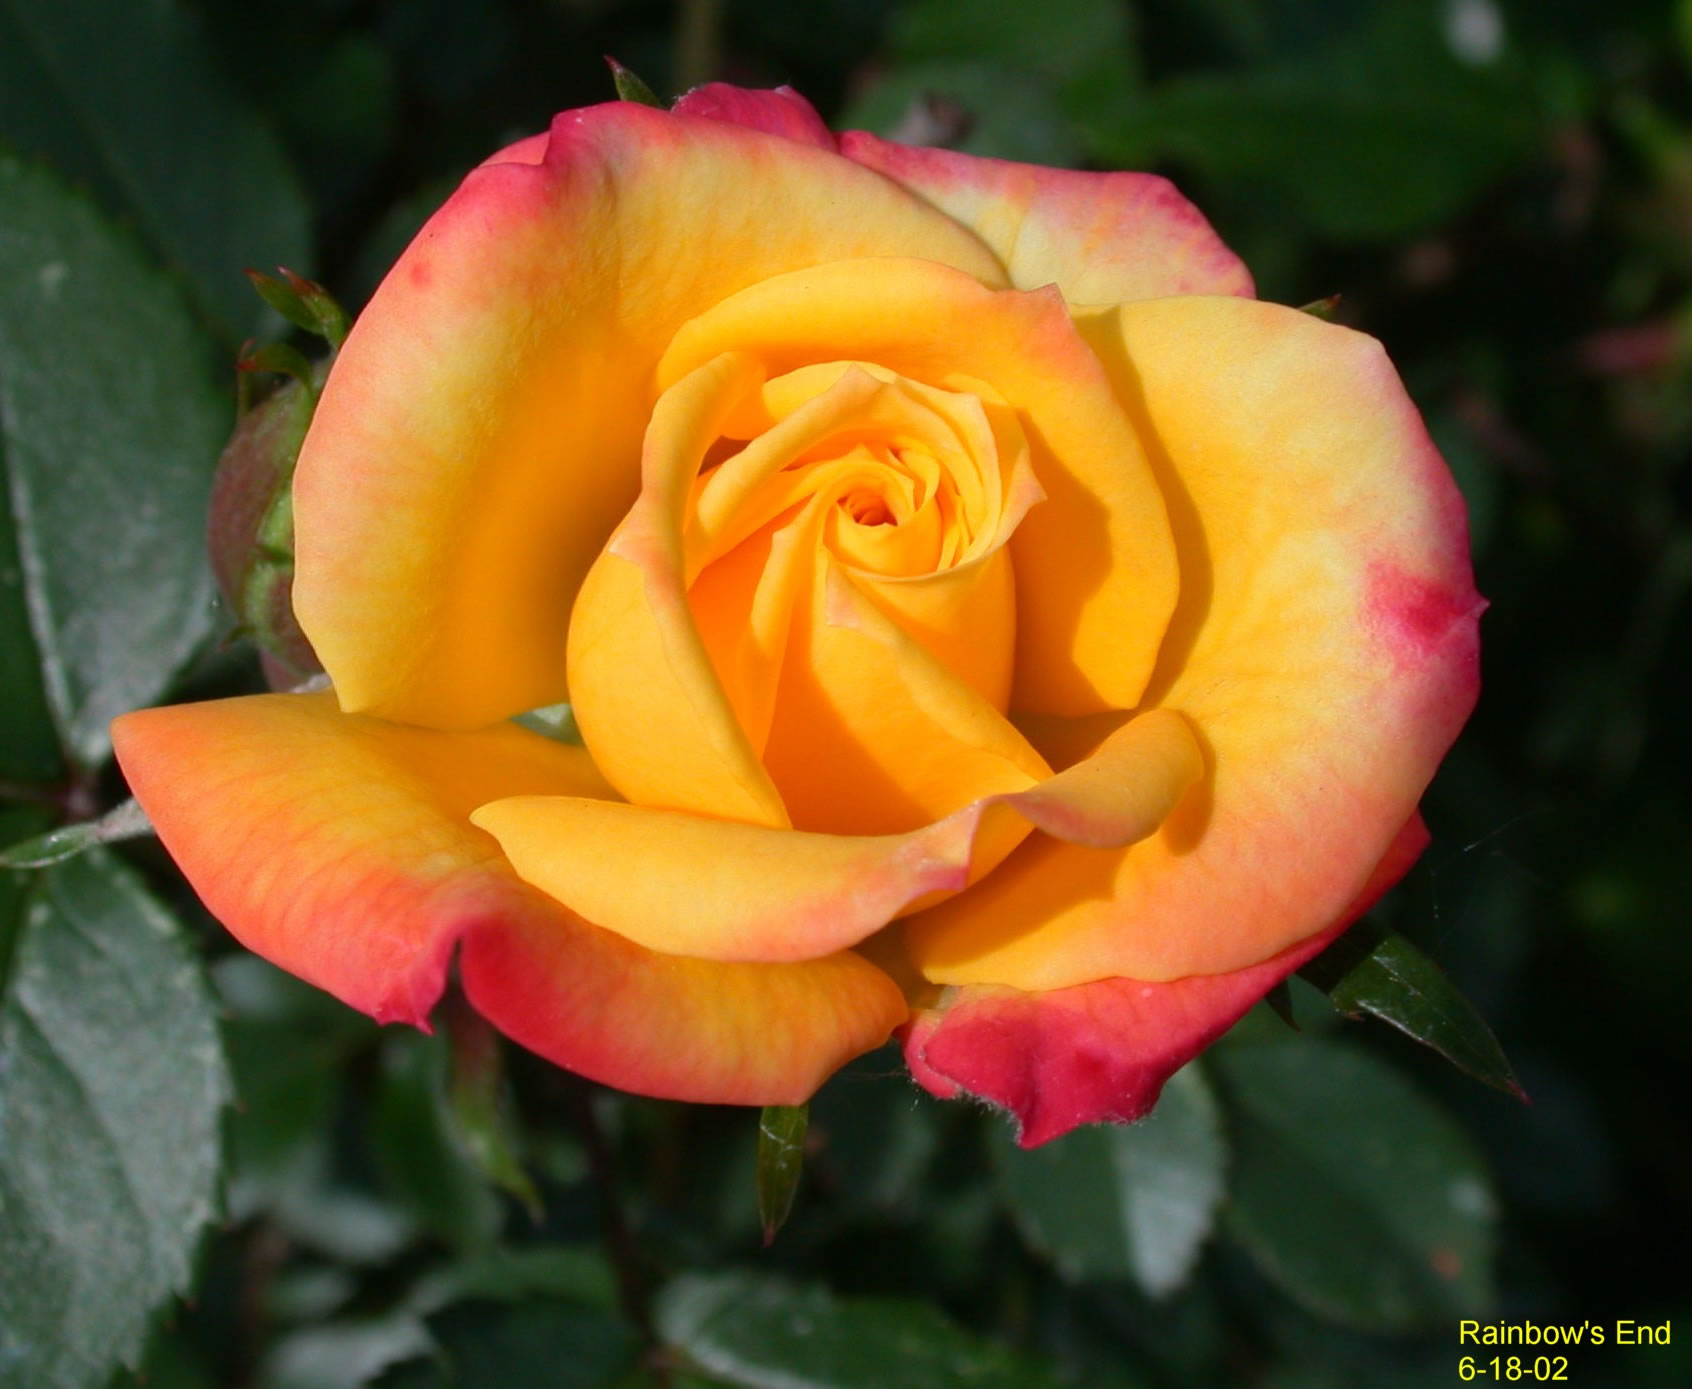 Rainbow's End_jpg - Northern RosarianNorthern Rosarian